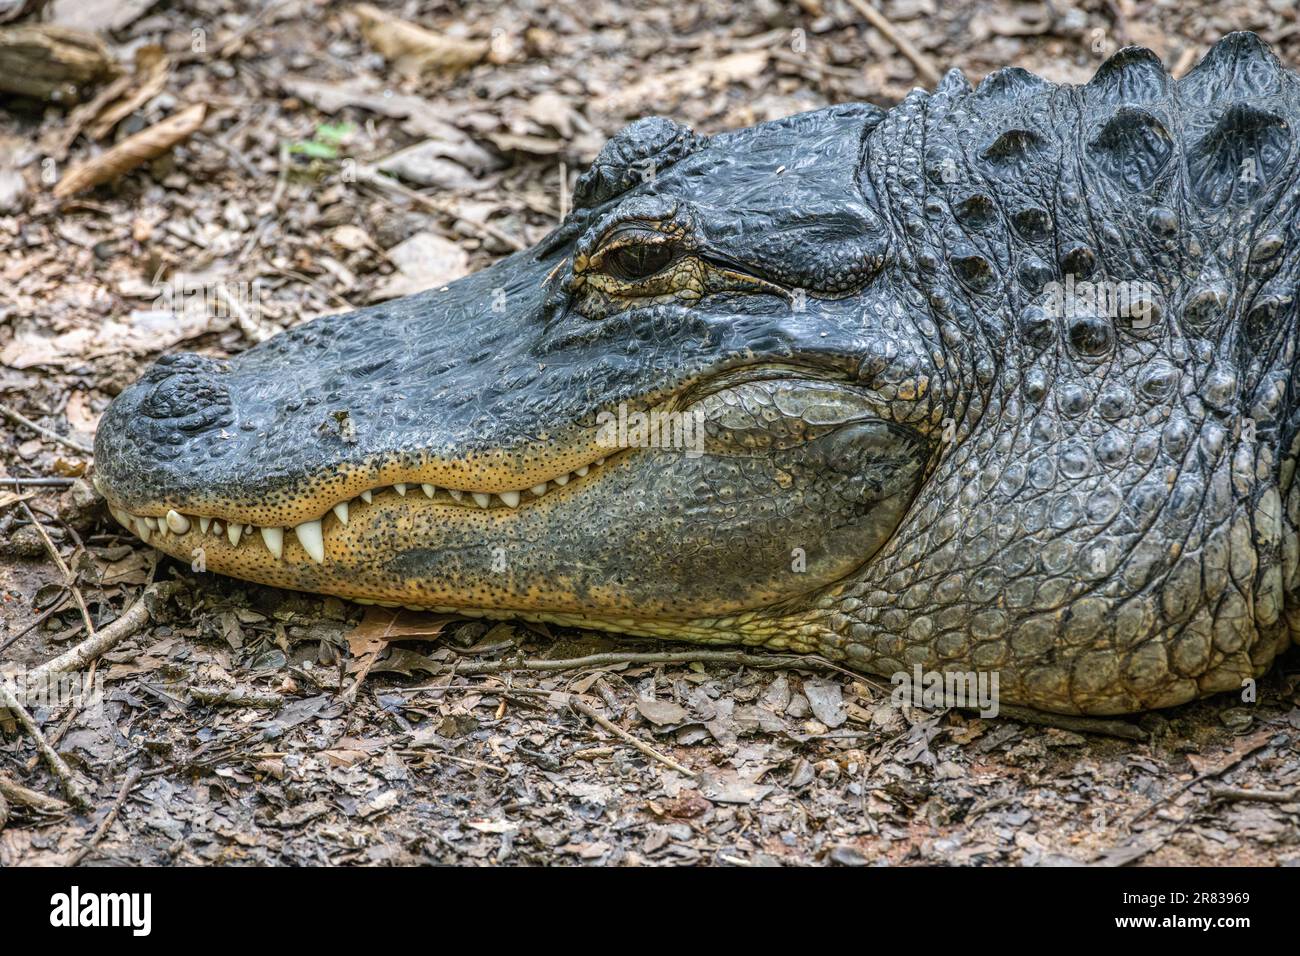 American alligator (Alligator mississippiensis) at Bear Hollow Zoo, home to only non-releasable native wildlife, in Athens, Georgia. (USA) Stock Photo